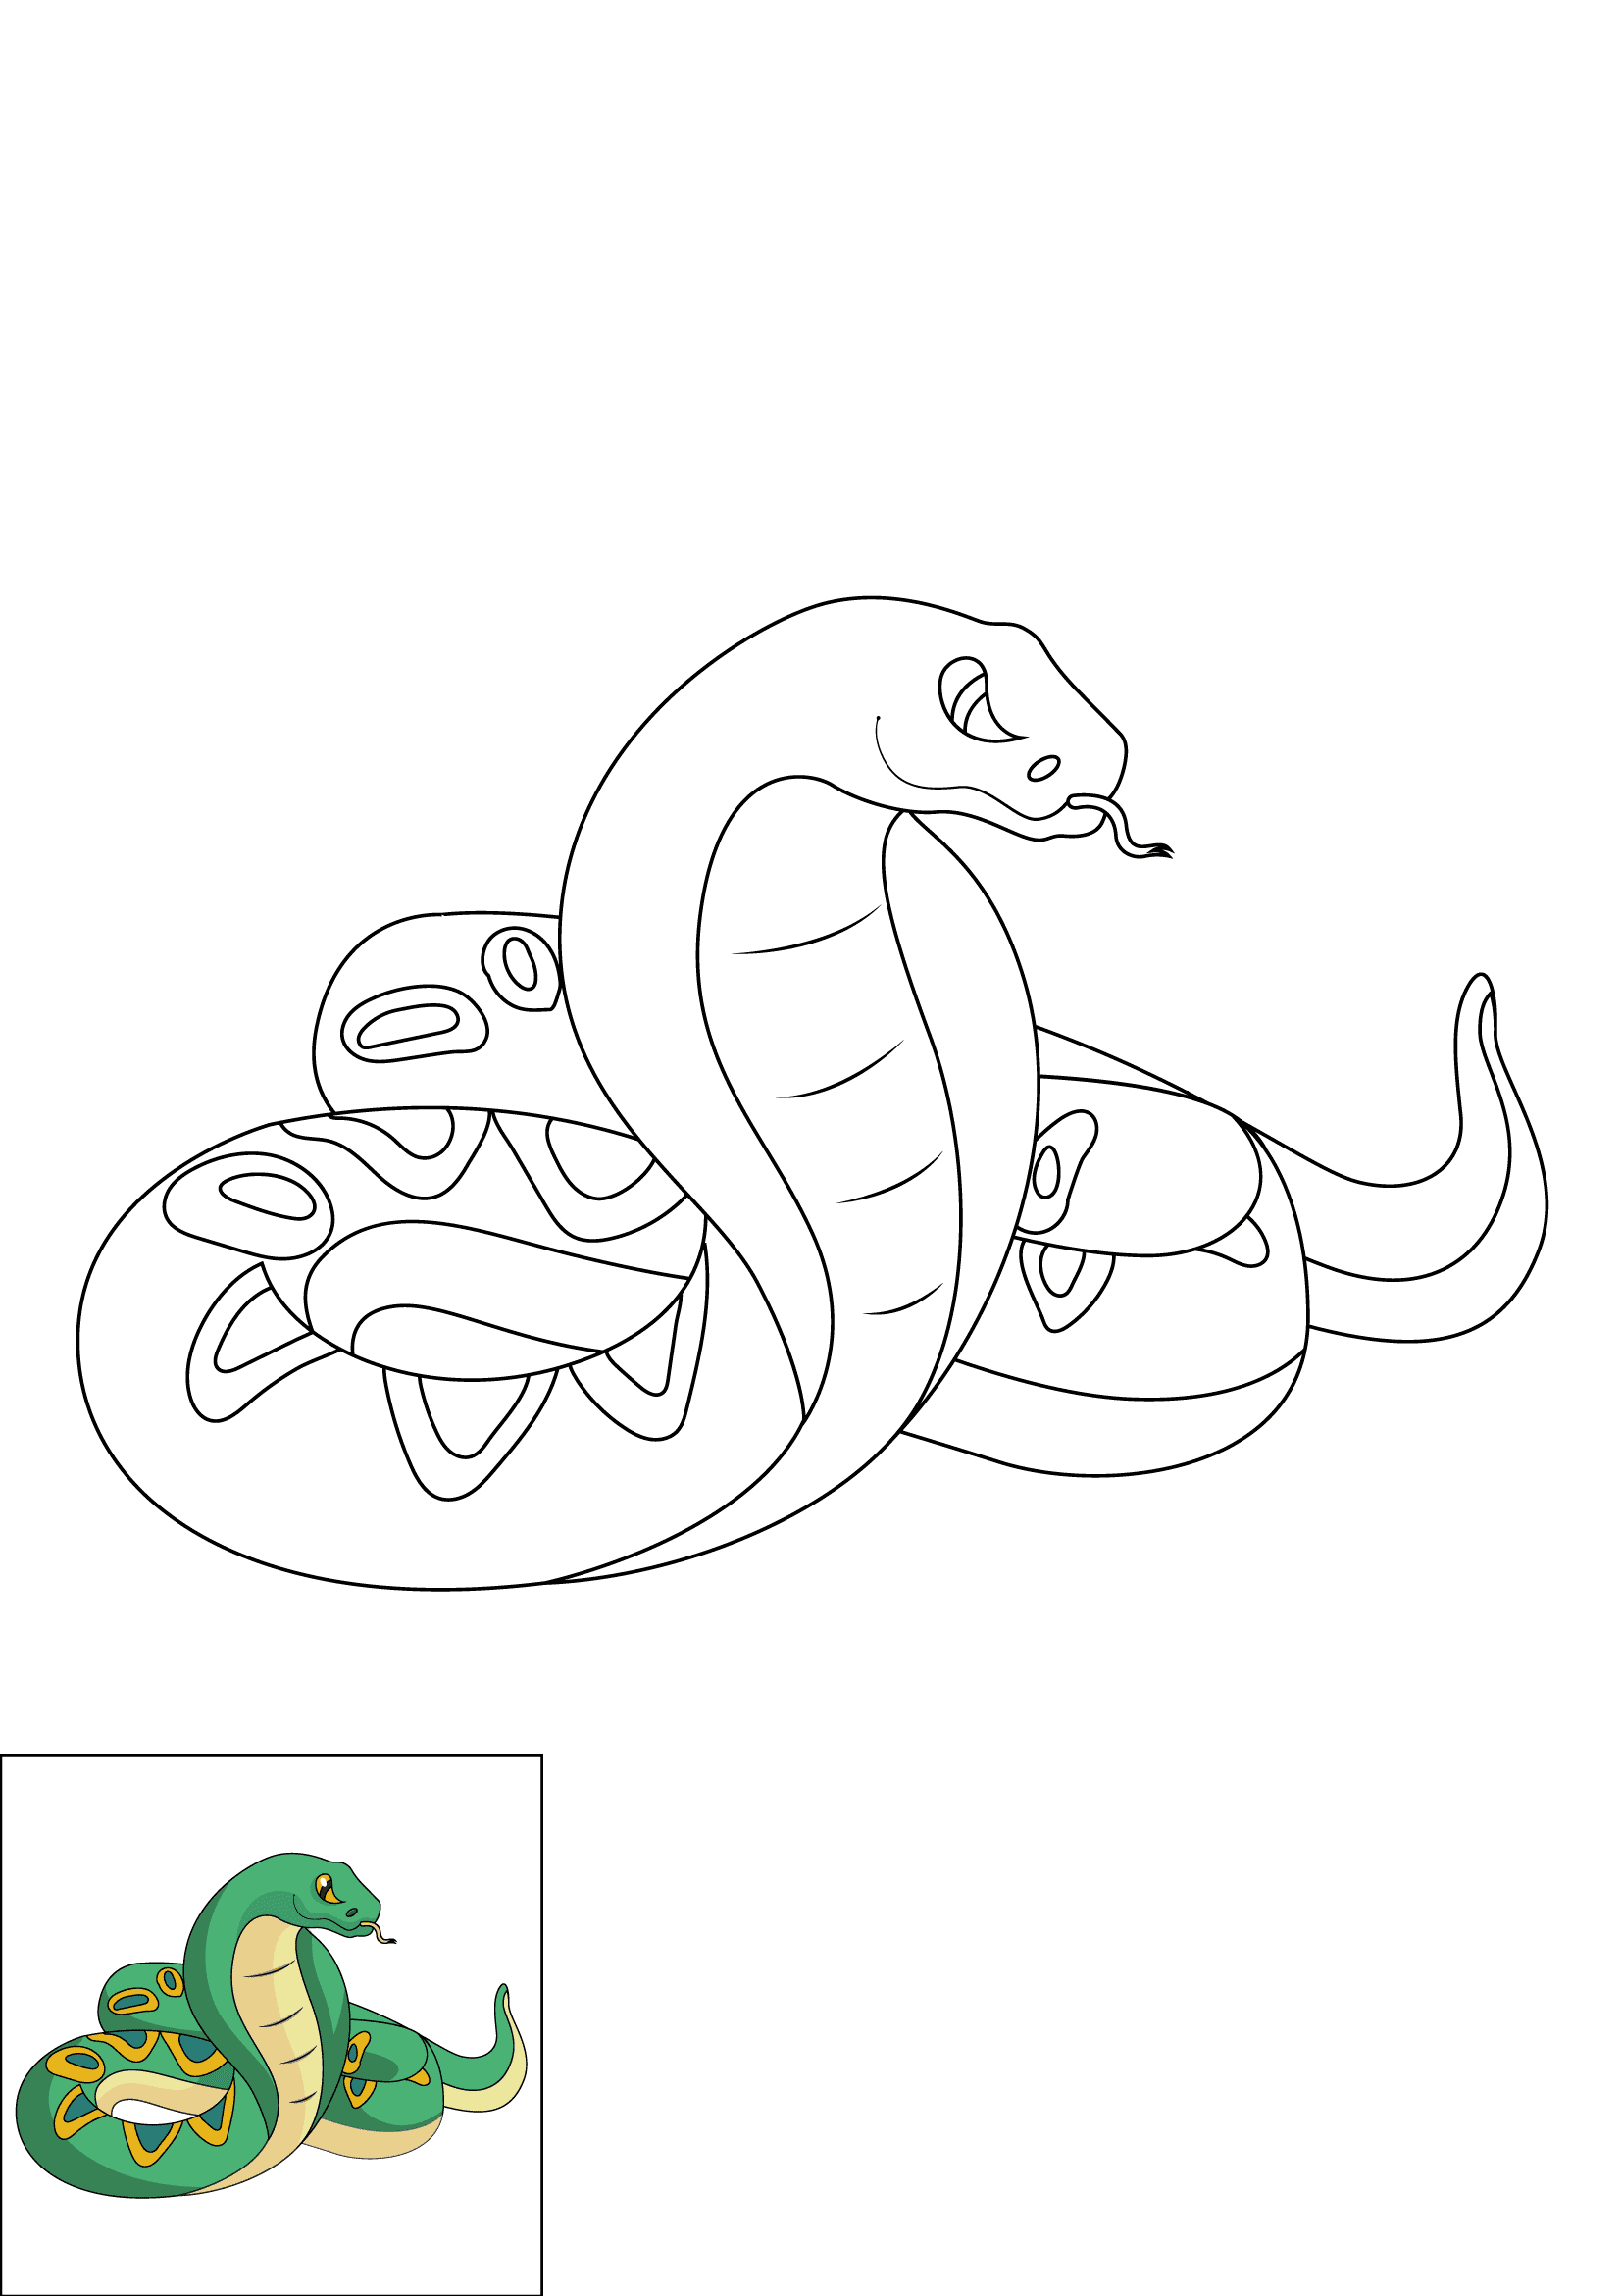 How to Draw A Snake Step by Step Printable Color